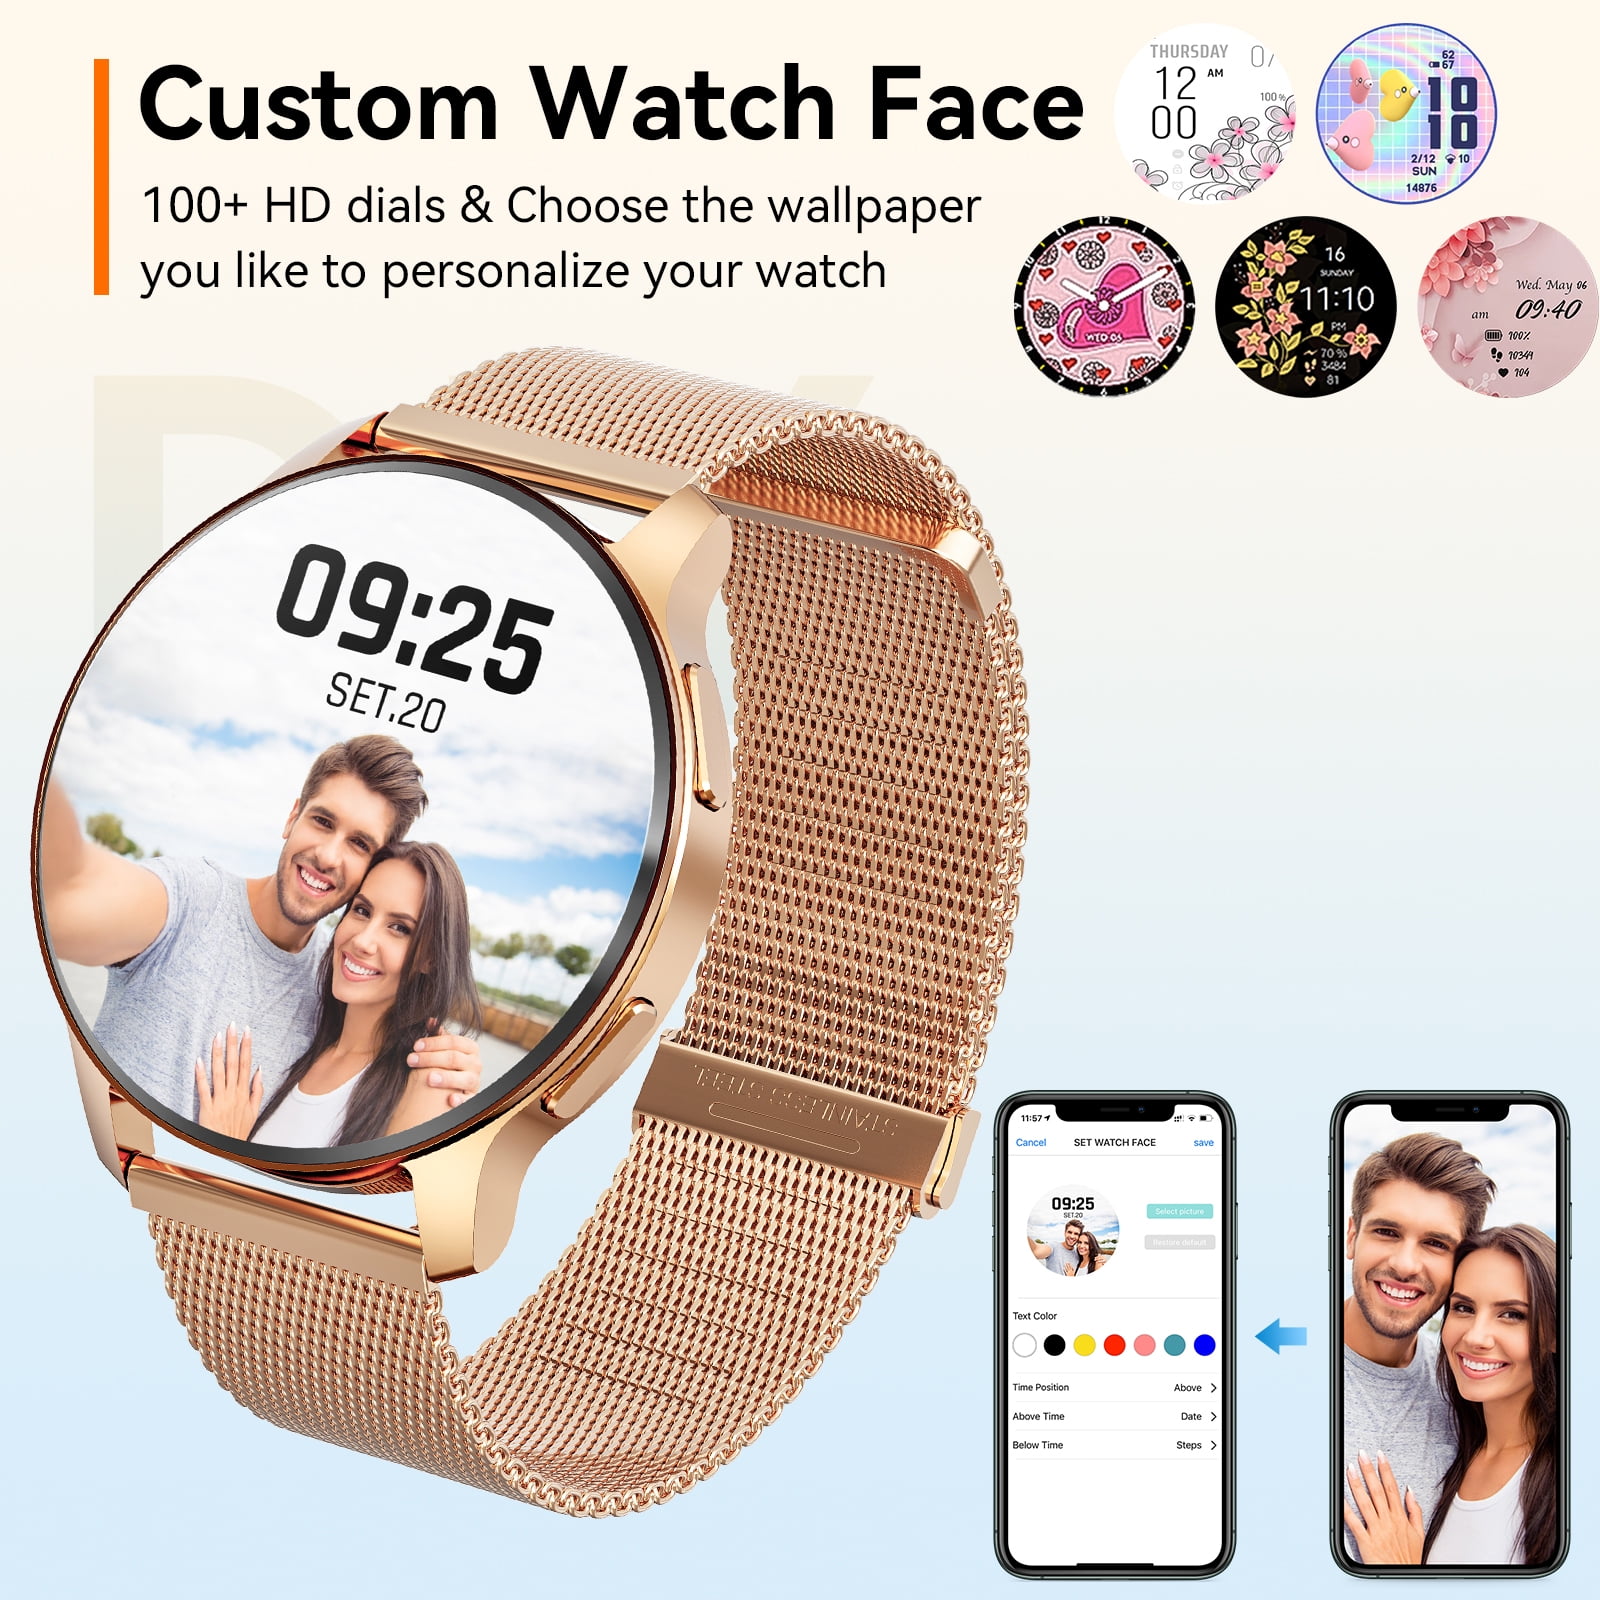 Women's Smartwatch with Call Function & Fitness Tracking